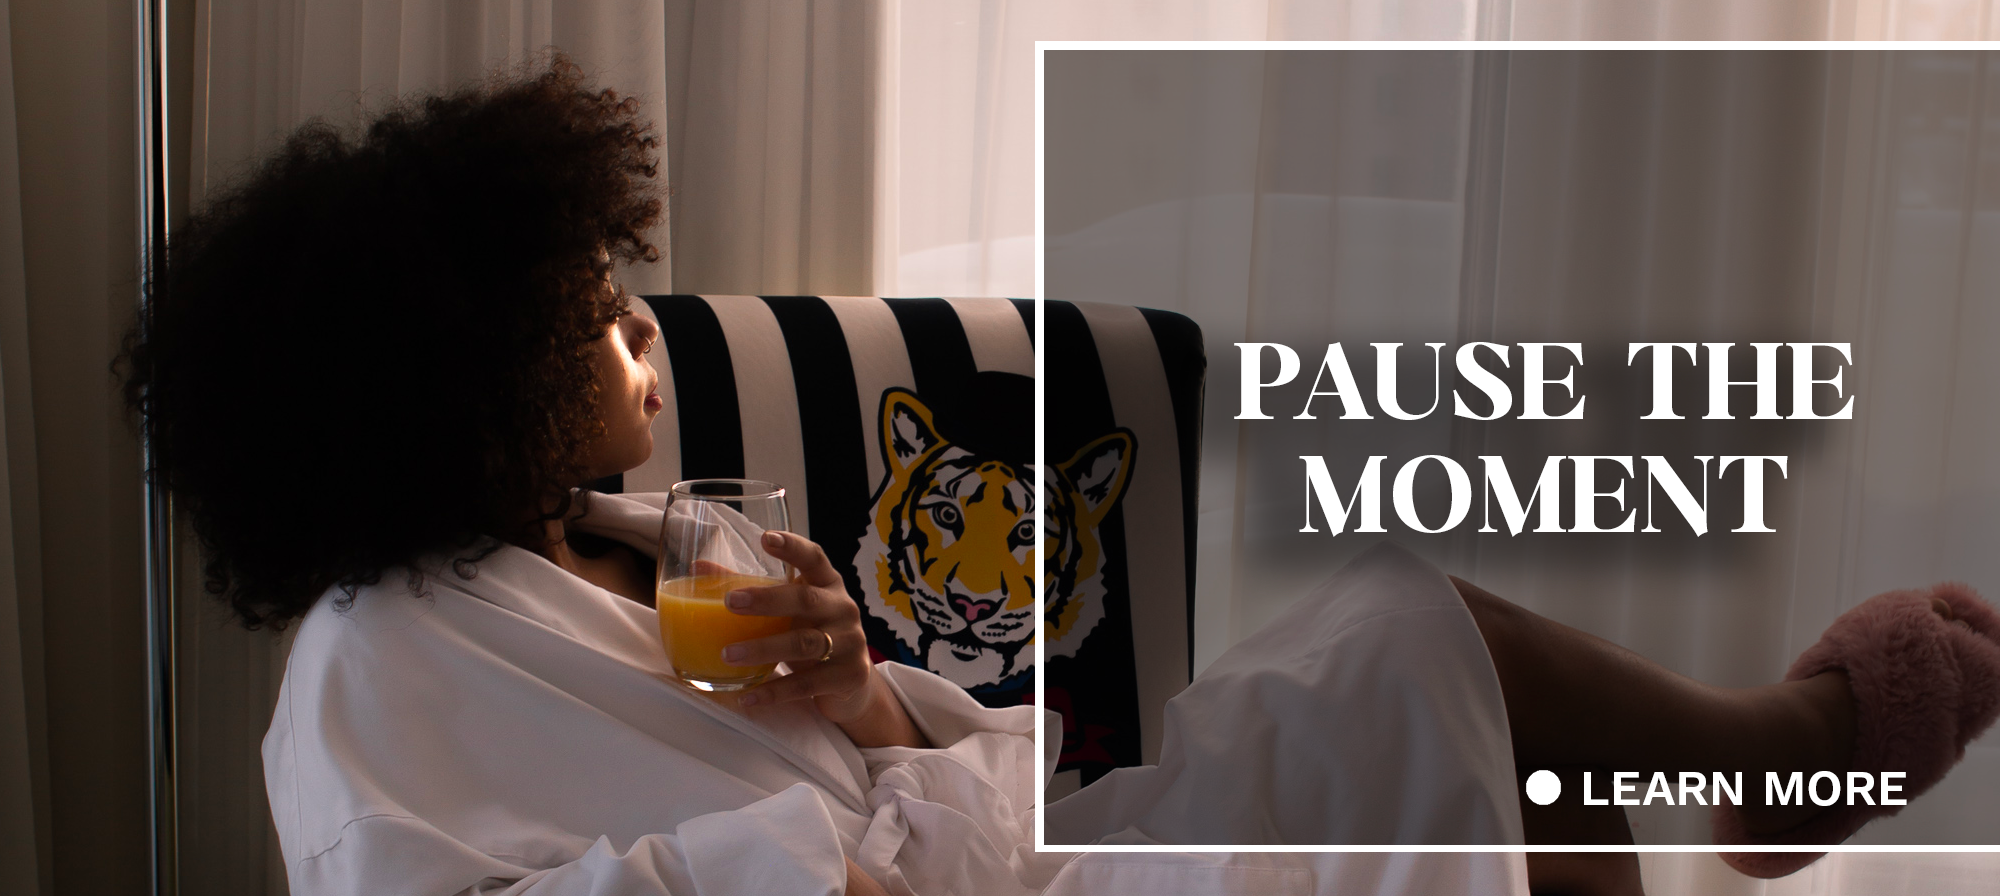 Pause the moment | Offers | Monsieur Jean | Hotel | Quebec